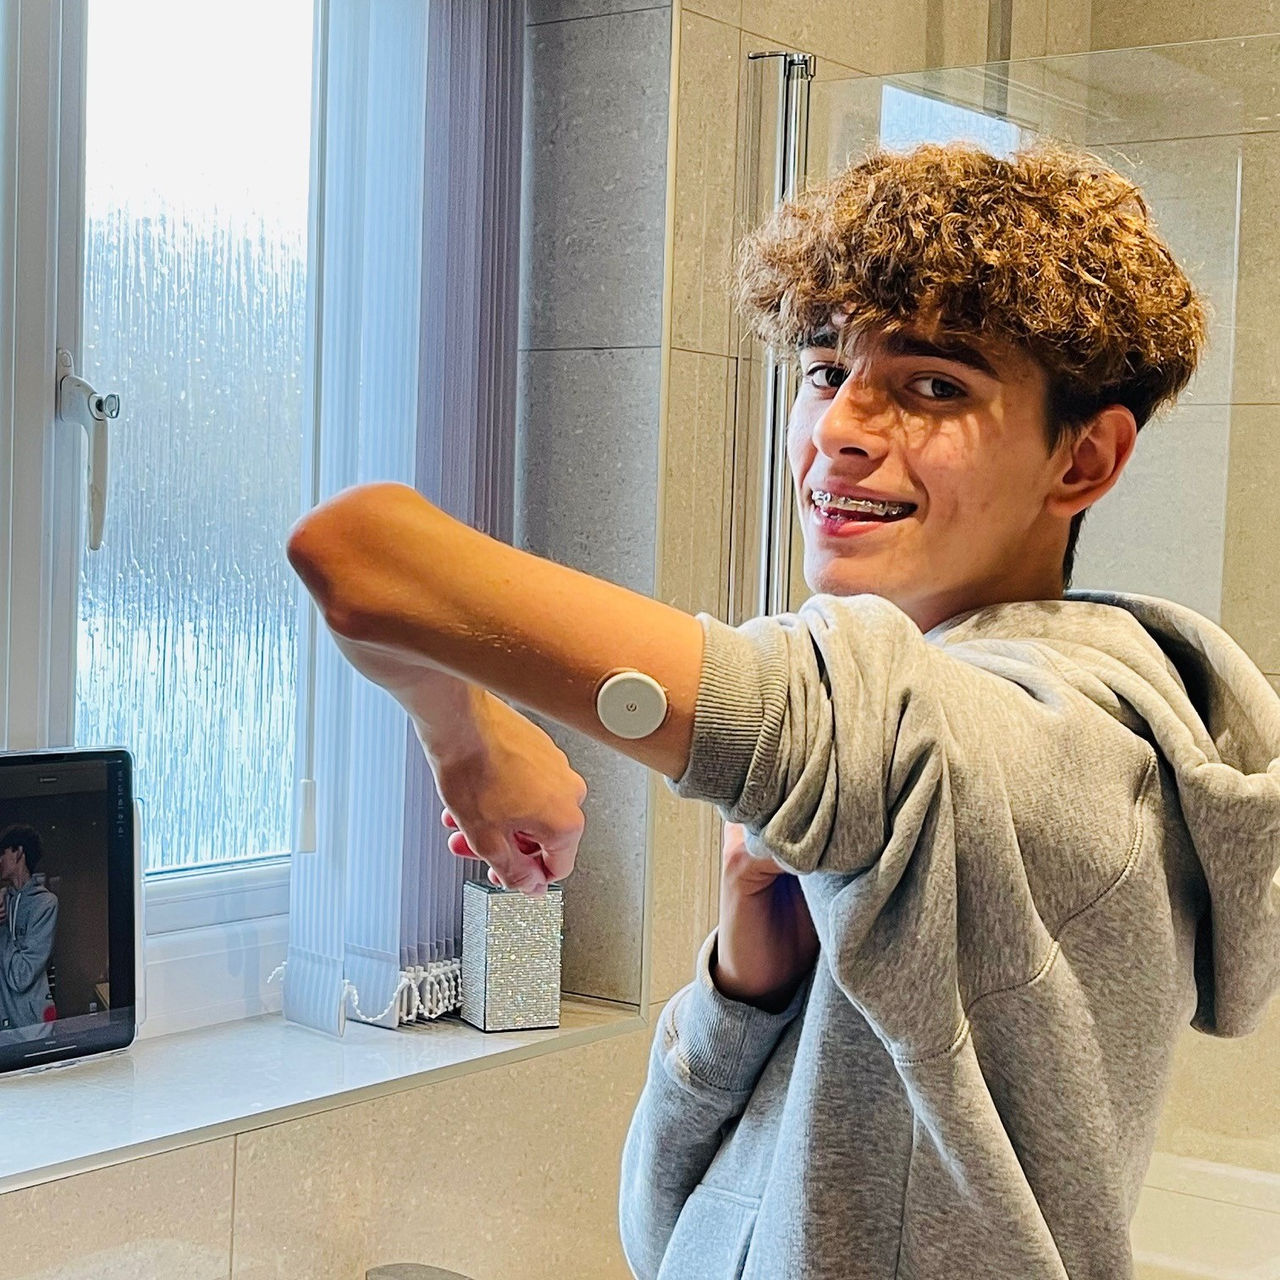 A boy looking at the camera smiling and showing his FreeStyle Libre sensor that is applied on the back of his arm.